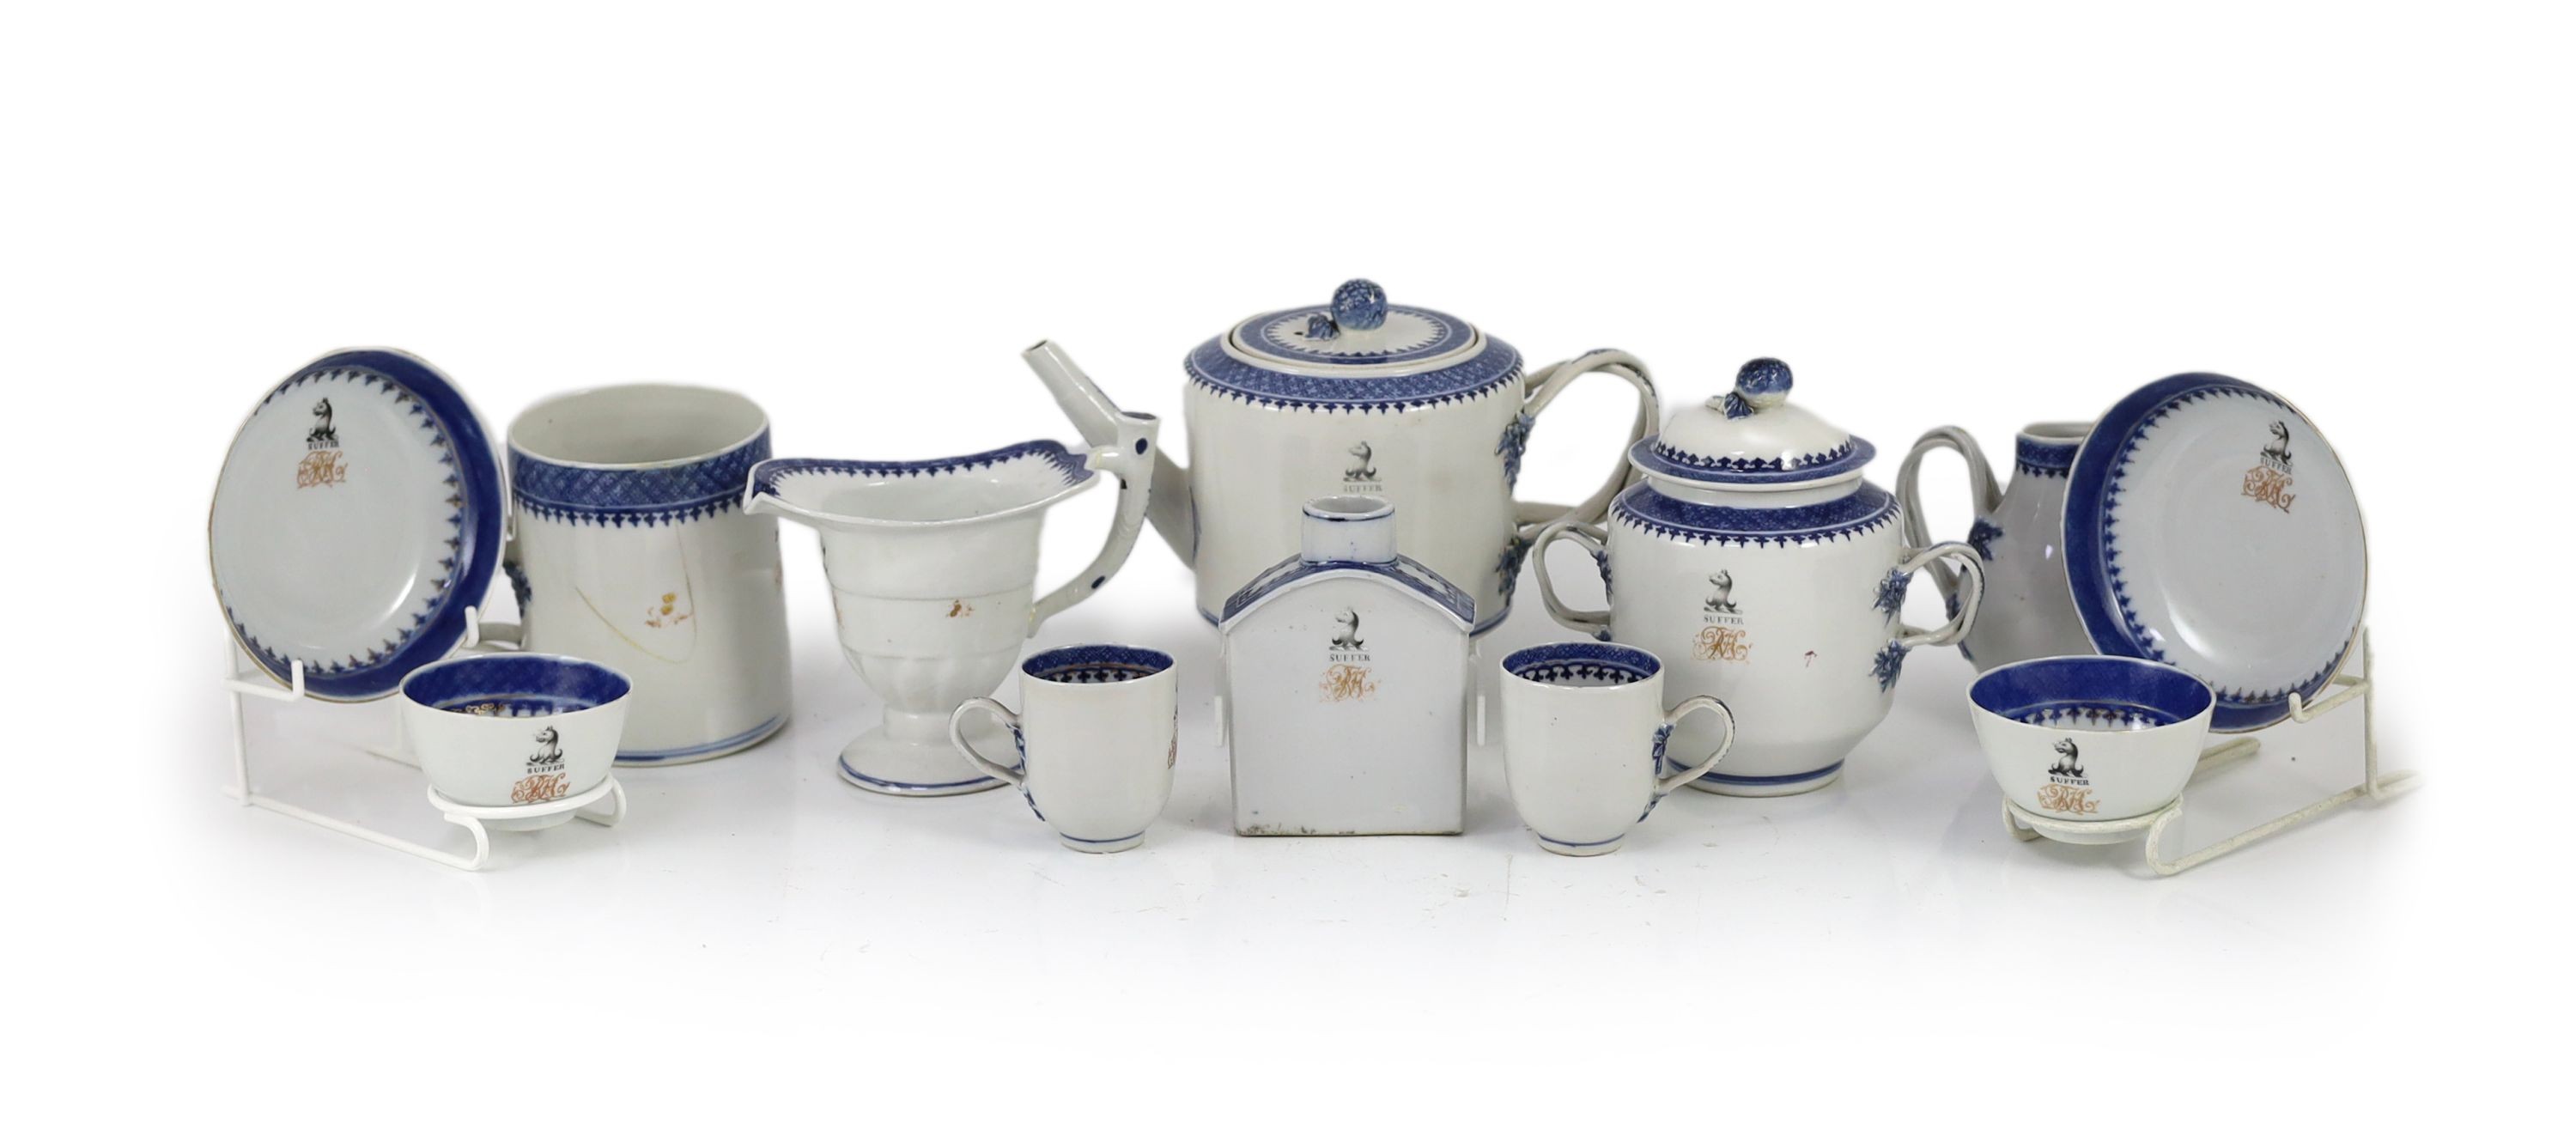 A Chinese export armorial forty two piece part tea service, late 18th century, decorated with the Haldane crest and motto 'Suffer'